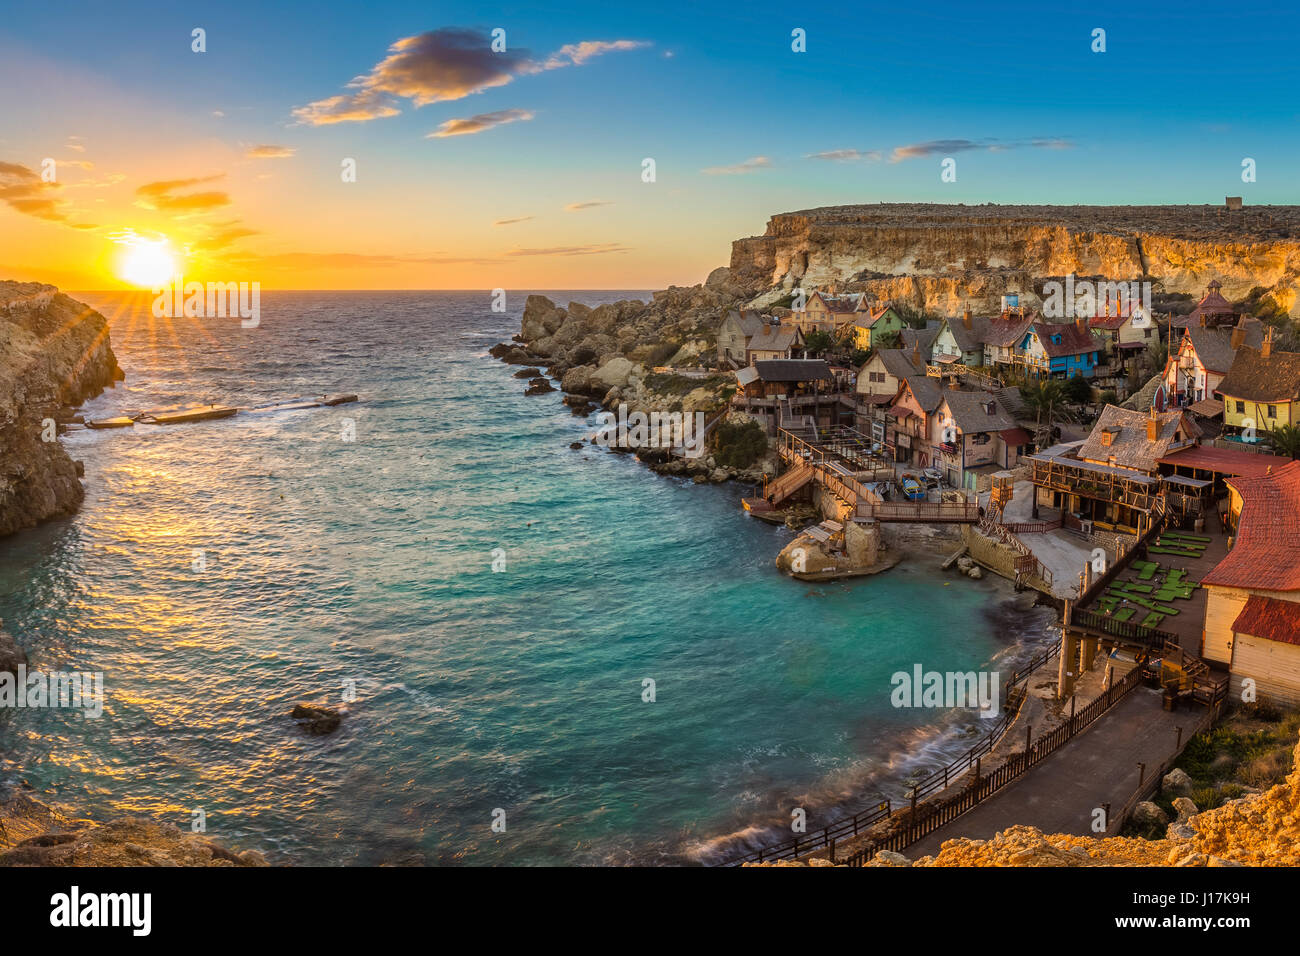 Il-Mellieha, Malta - Panoramic view of the famous Popeye Village at Anchor Bay at sunset Stock Photo